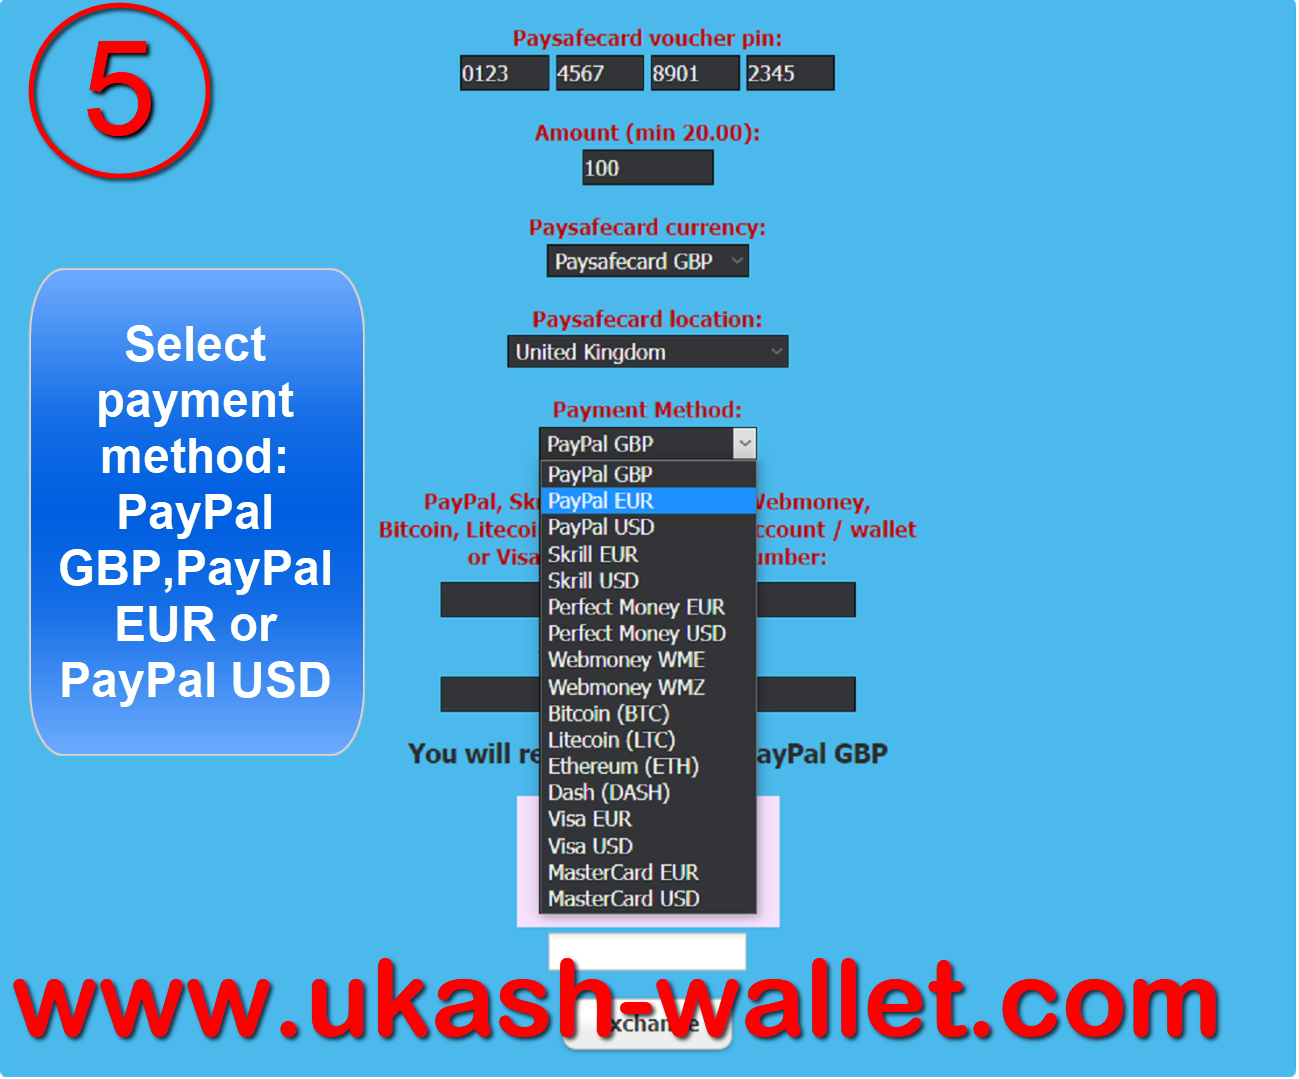 Paysafecard to Paypal instantly - Step five.